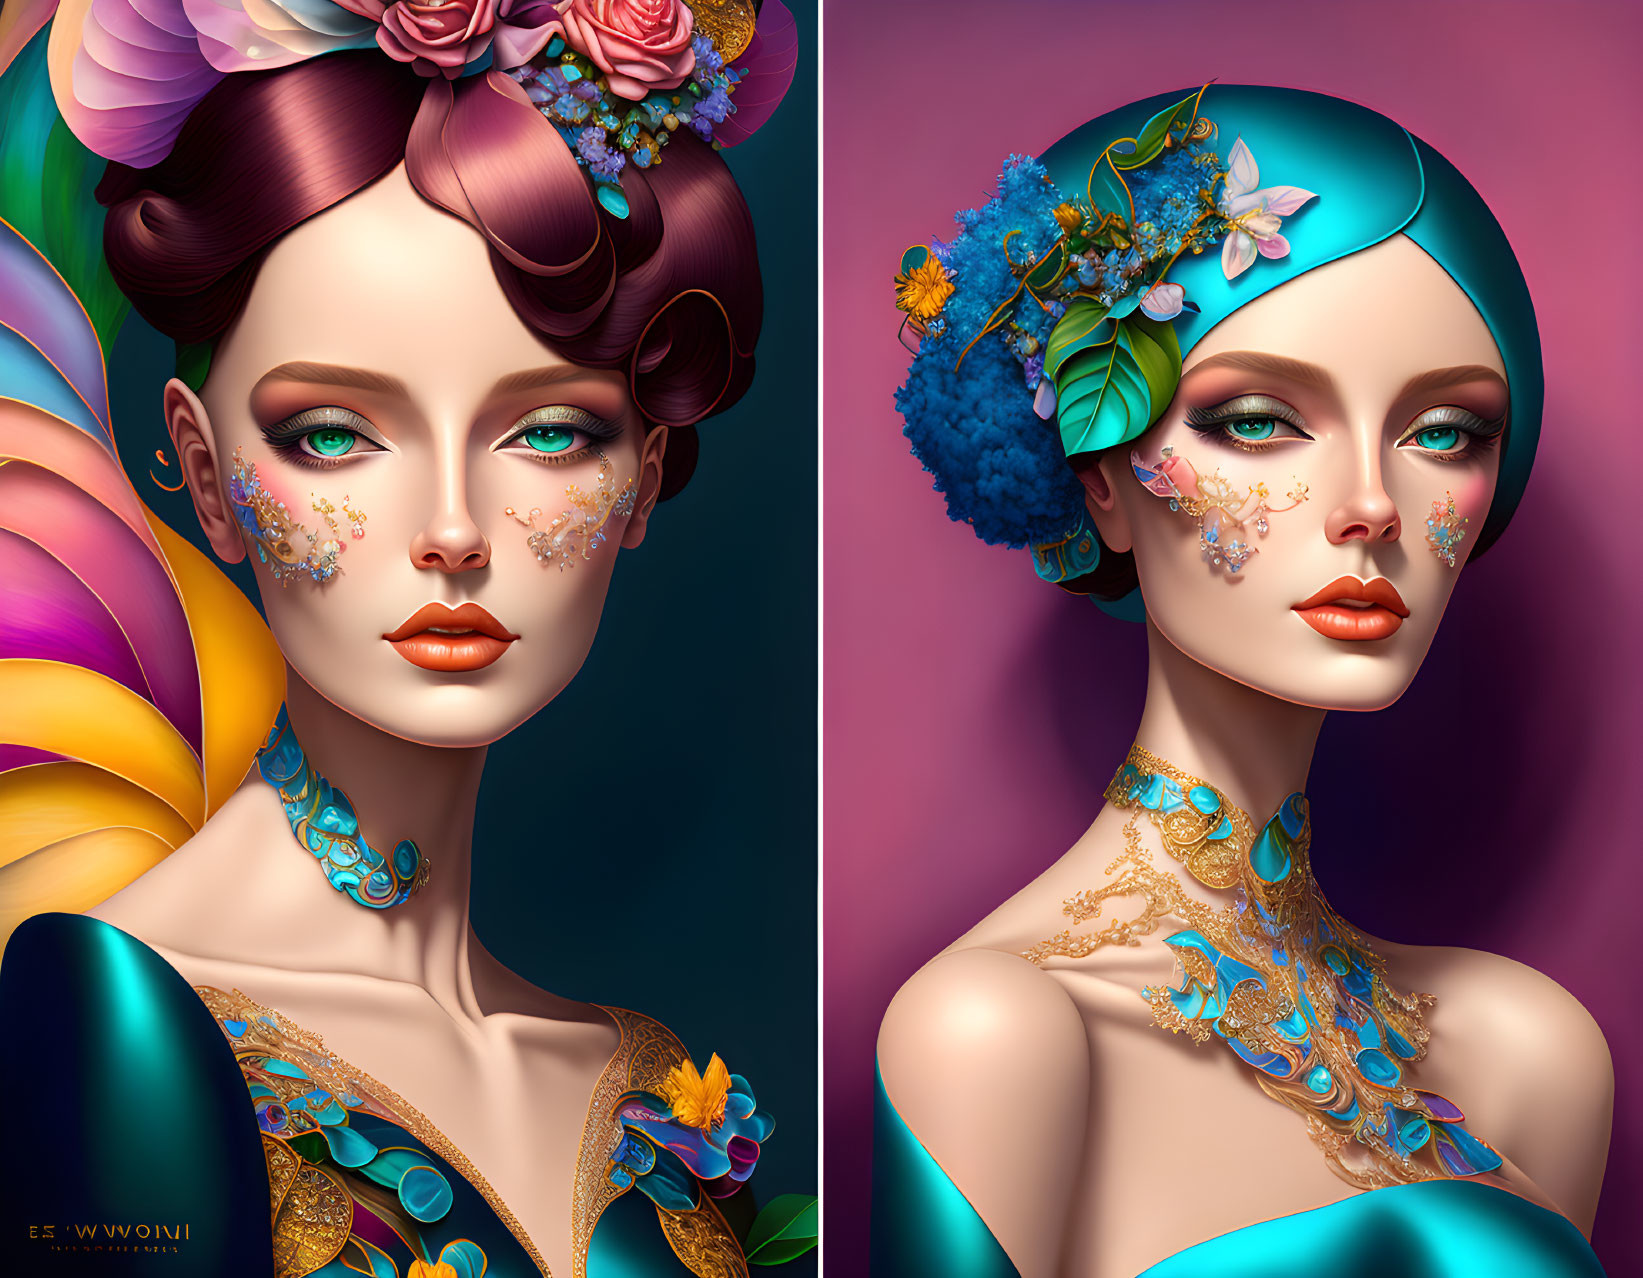 Stylized portraits of a woman with elaborate hairstyles and vibrant makeup on colorful background